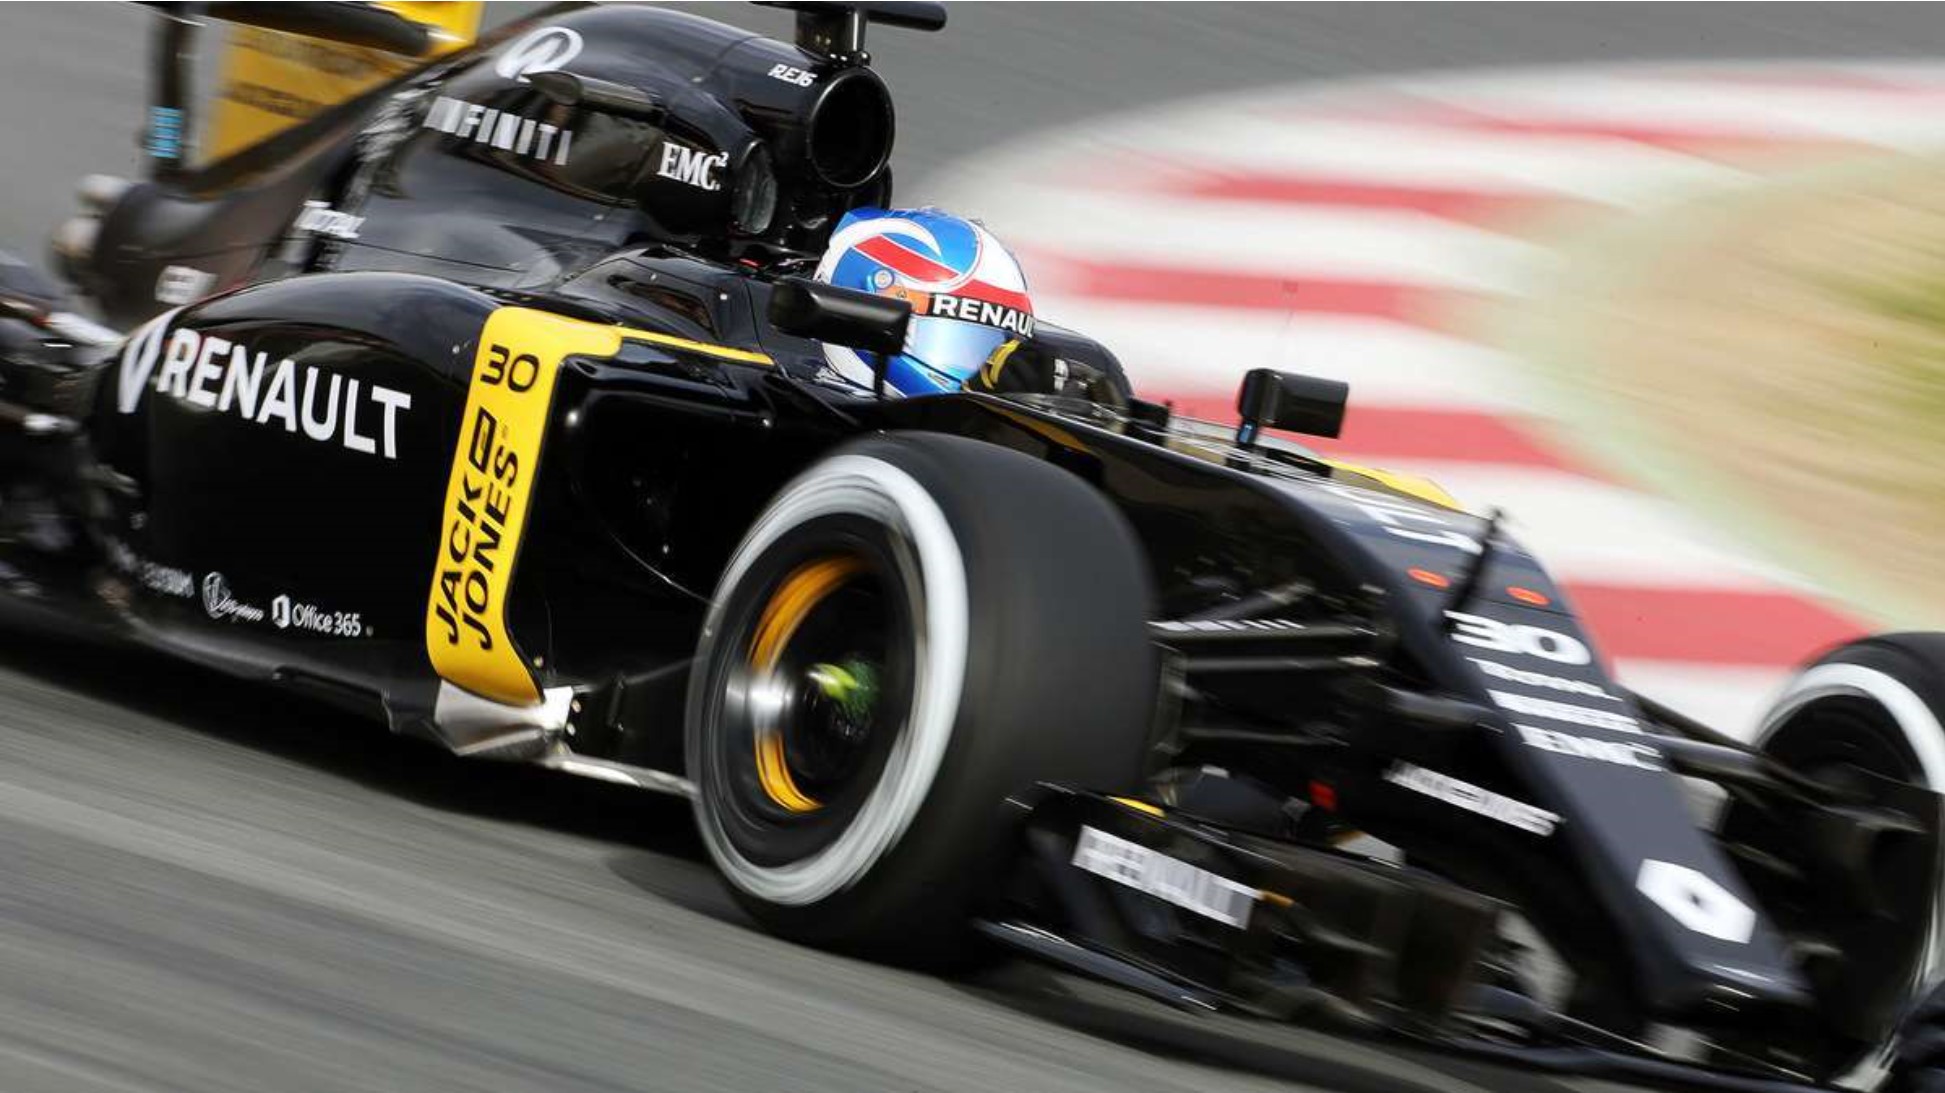 New Renault won't be winning any races in 2016